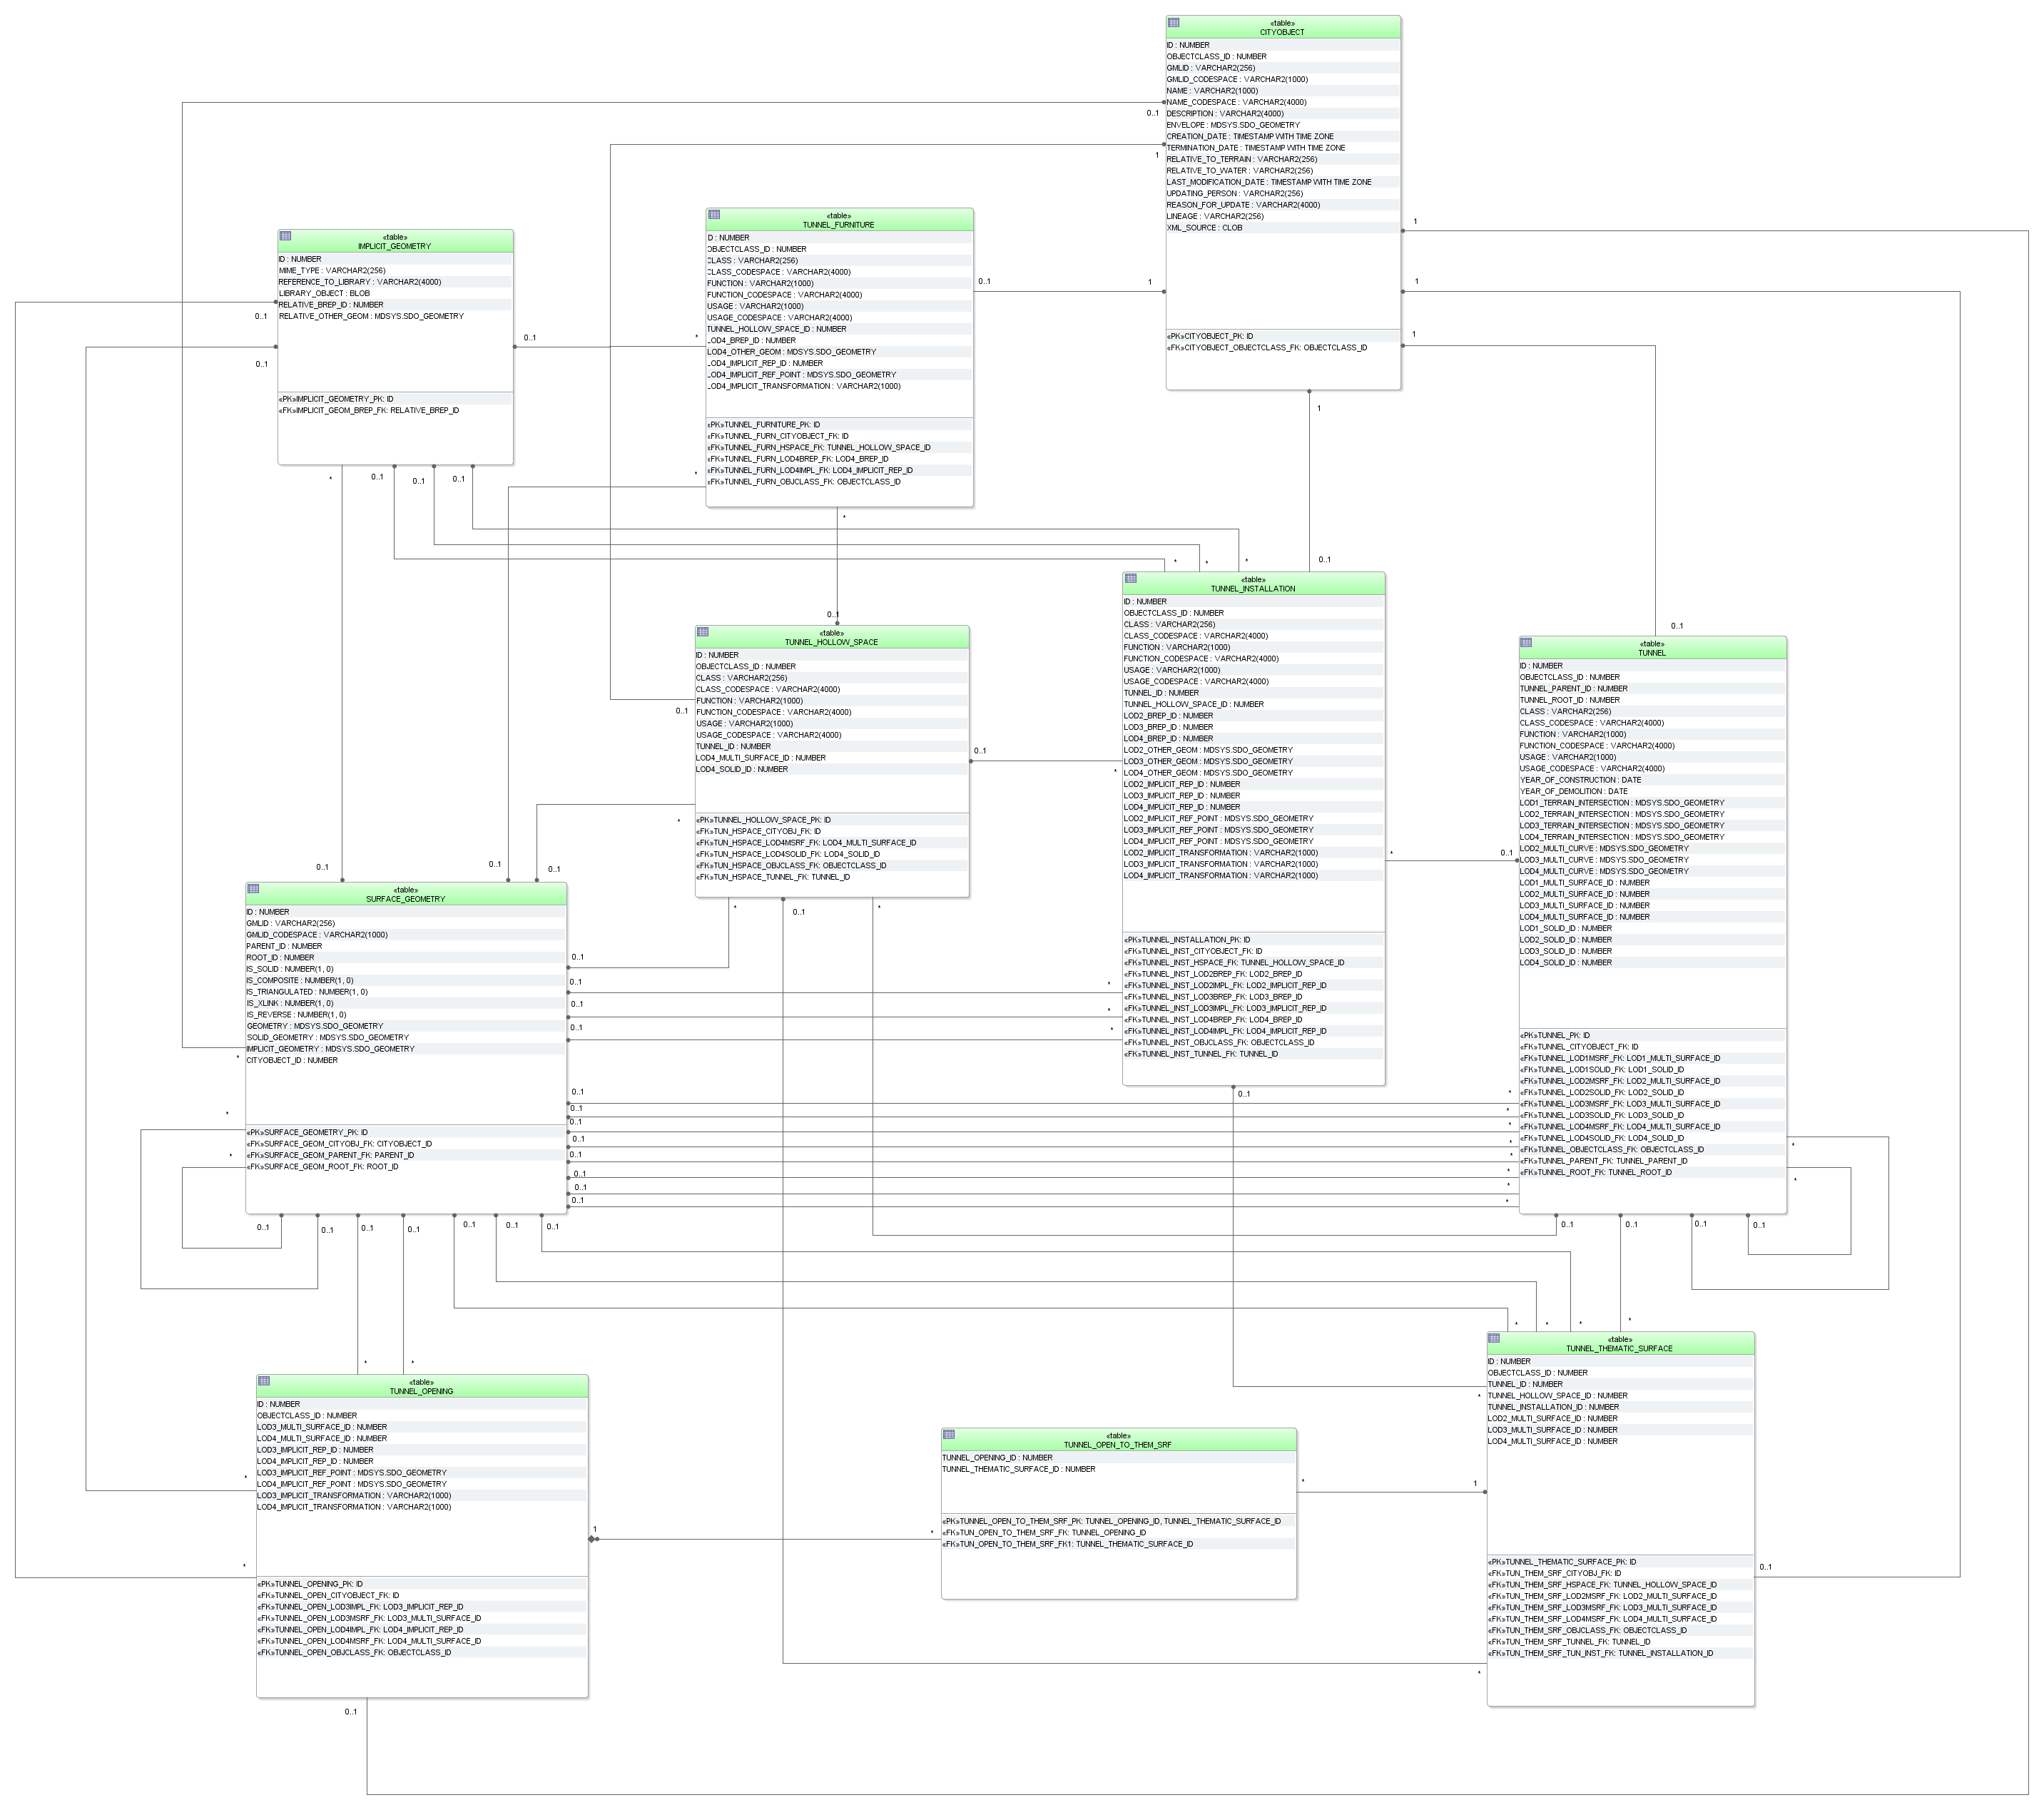 ../../../_images/citydb_schema_tunnel_diagram.png